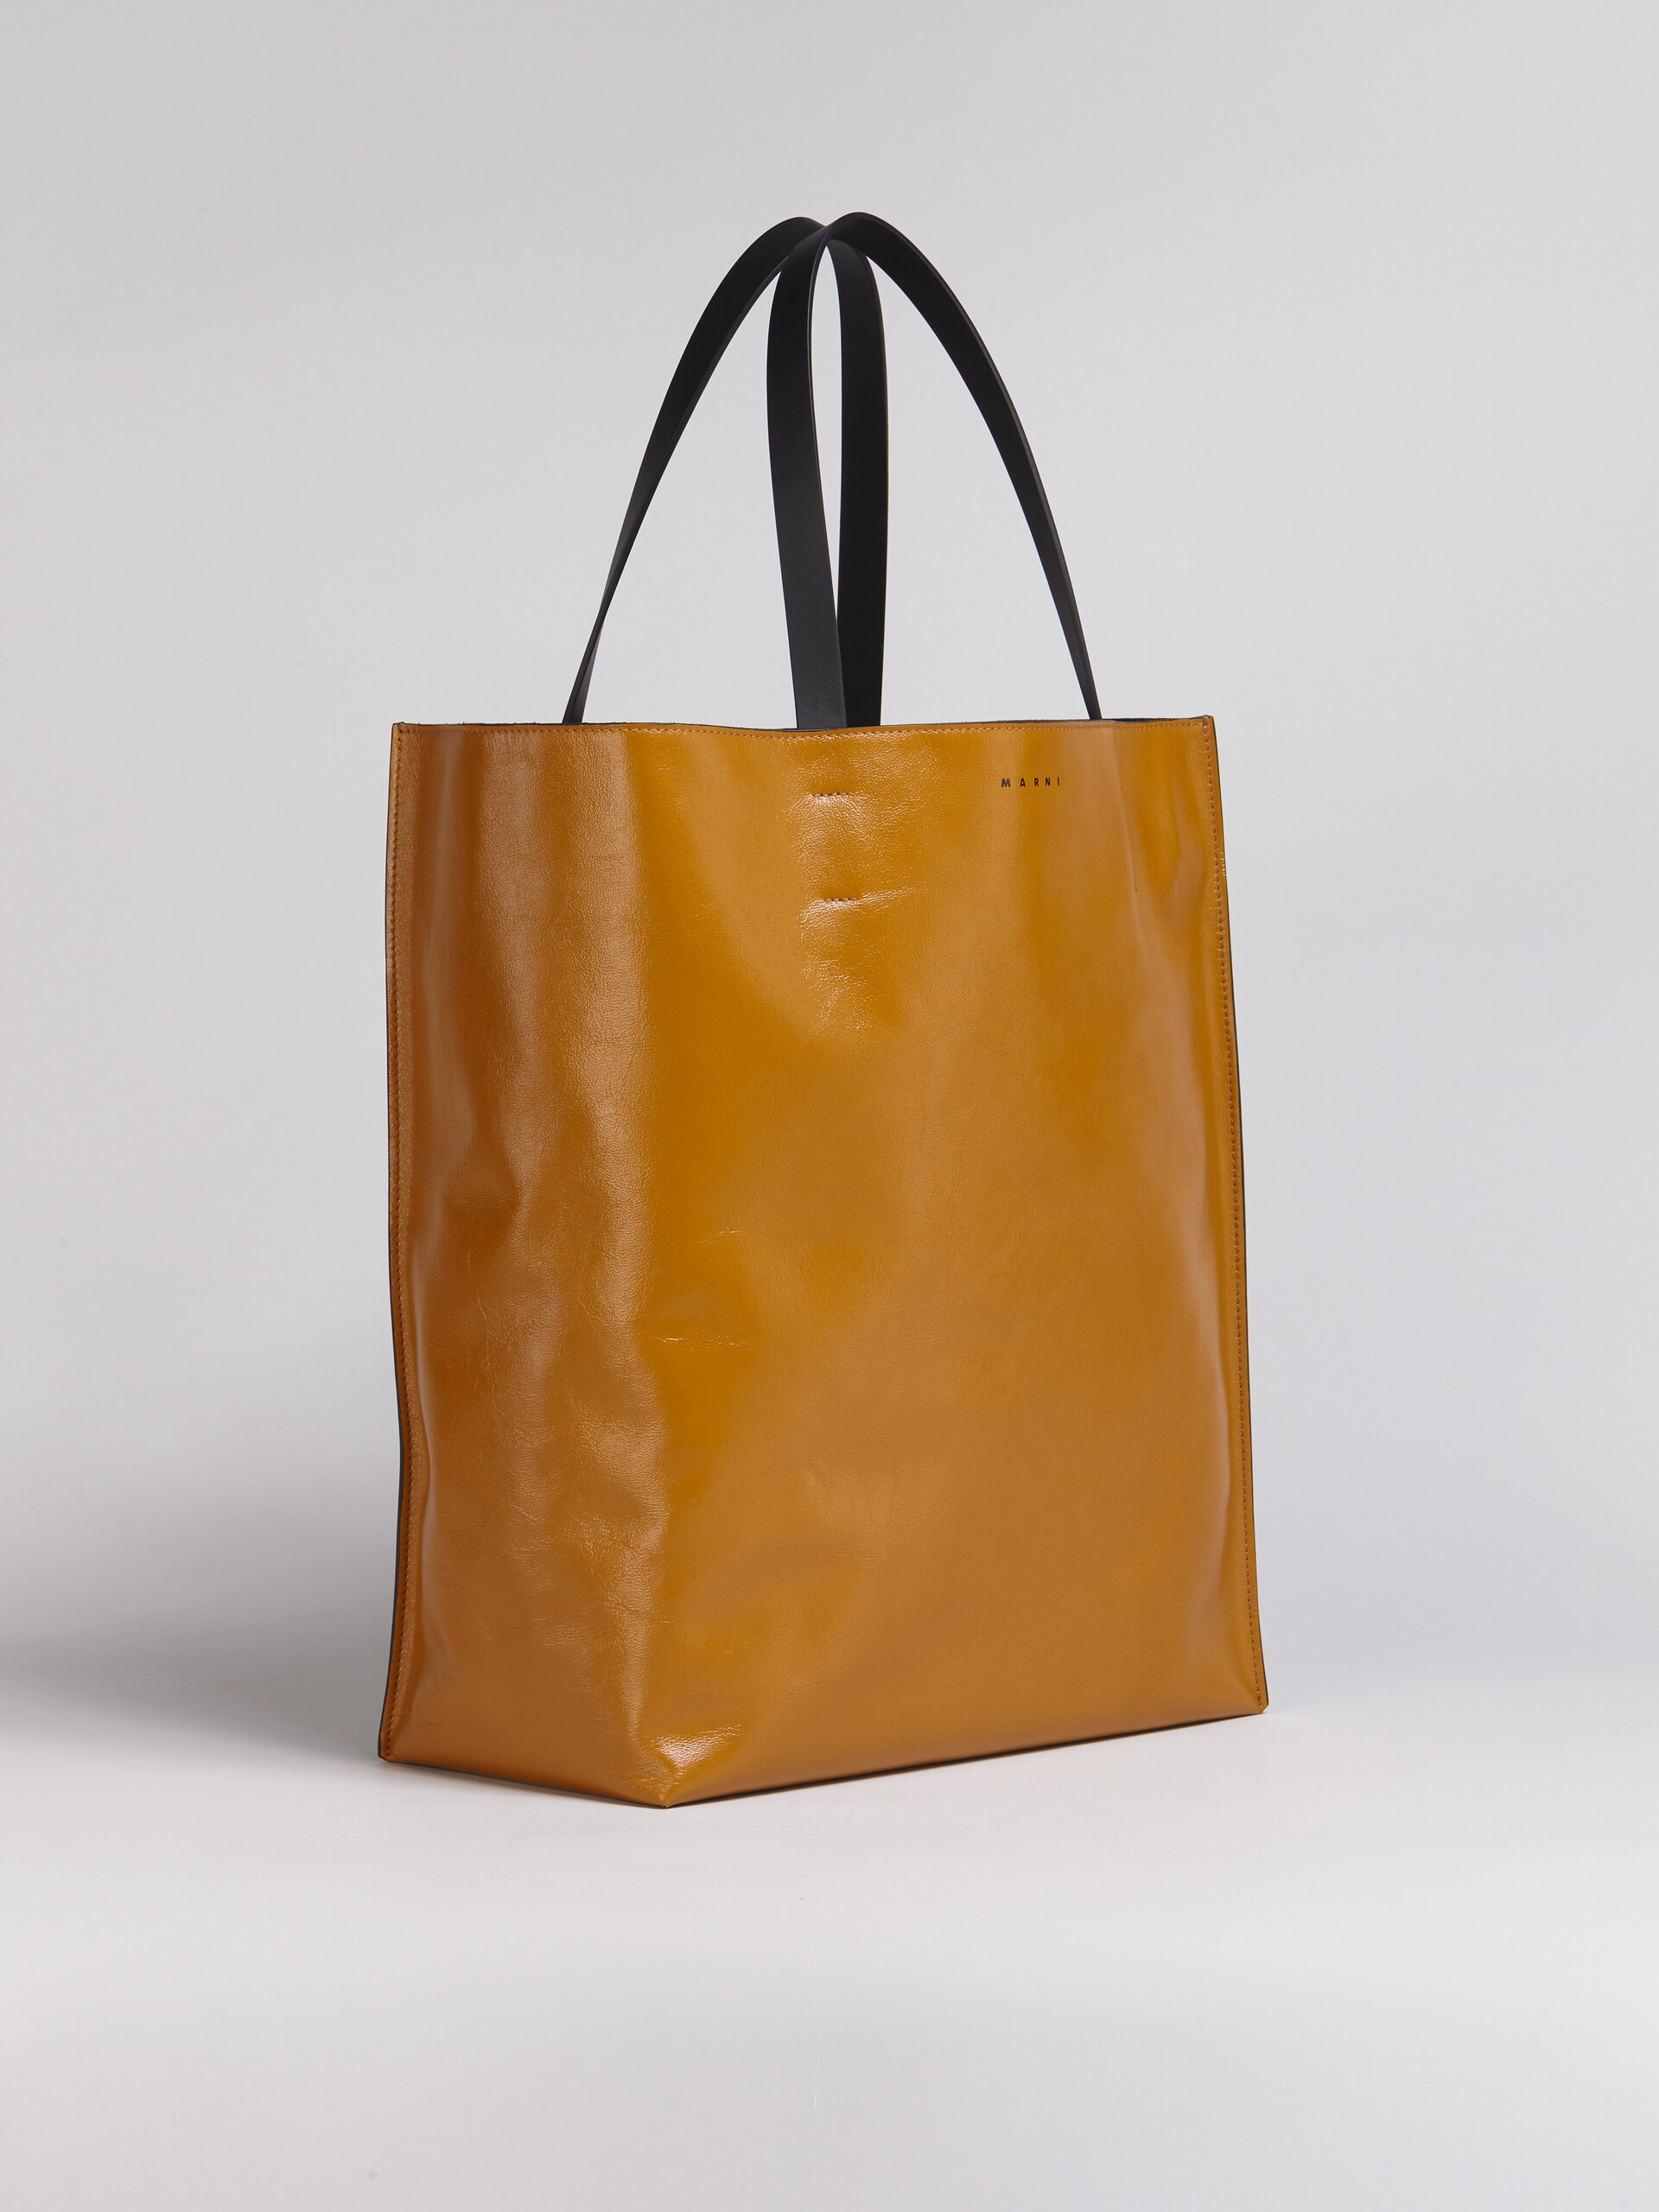 MUSEO SOFT bag in shiny brown and black leather - Shopping Bags - Image 5